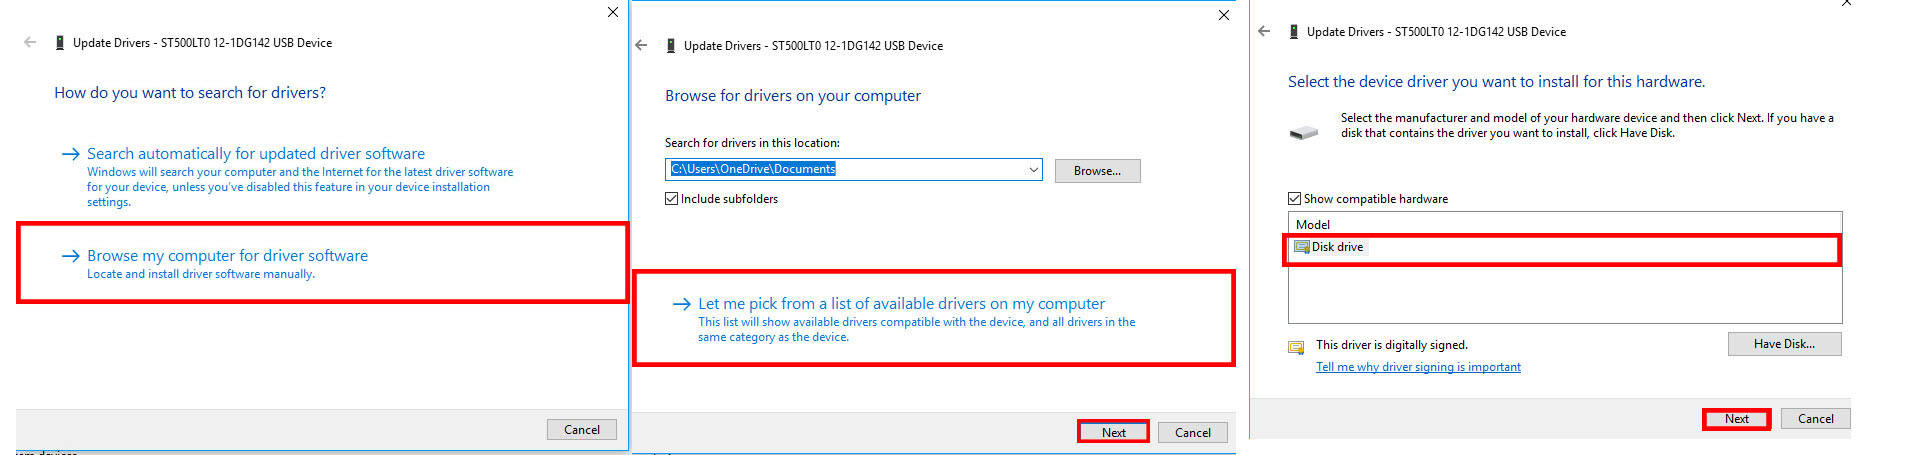 hard disk power on time incorrect